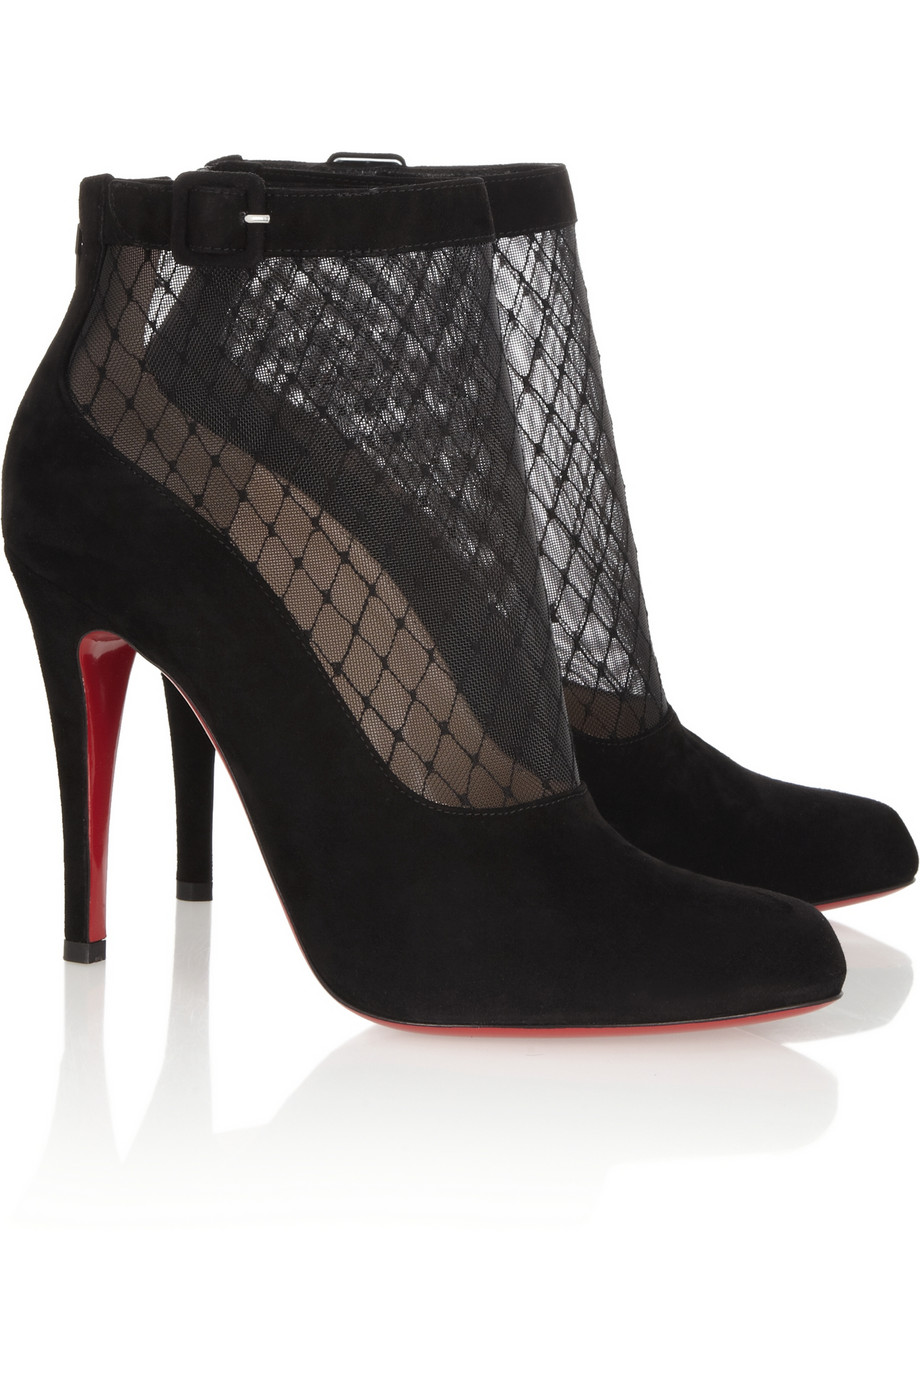 christian-louboutin-black-resillissima-100-suede-and-mesh-ankle-boots-product-1-12921703-781768914.jpeg  